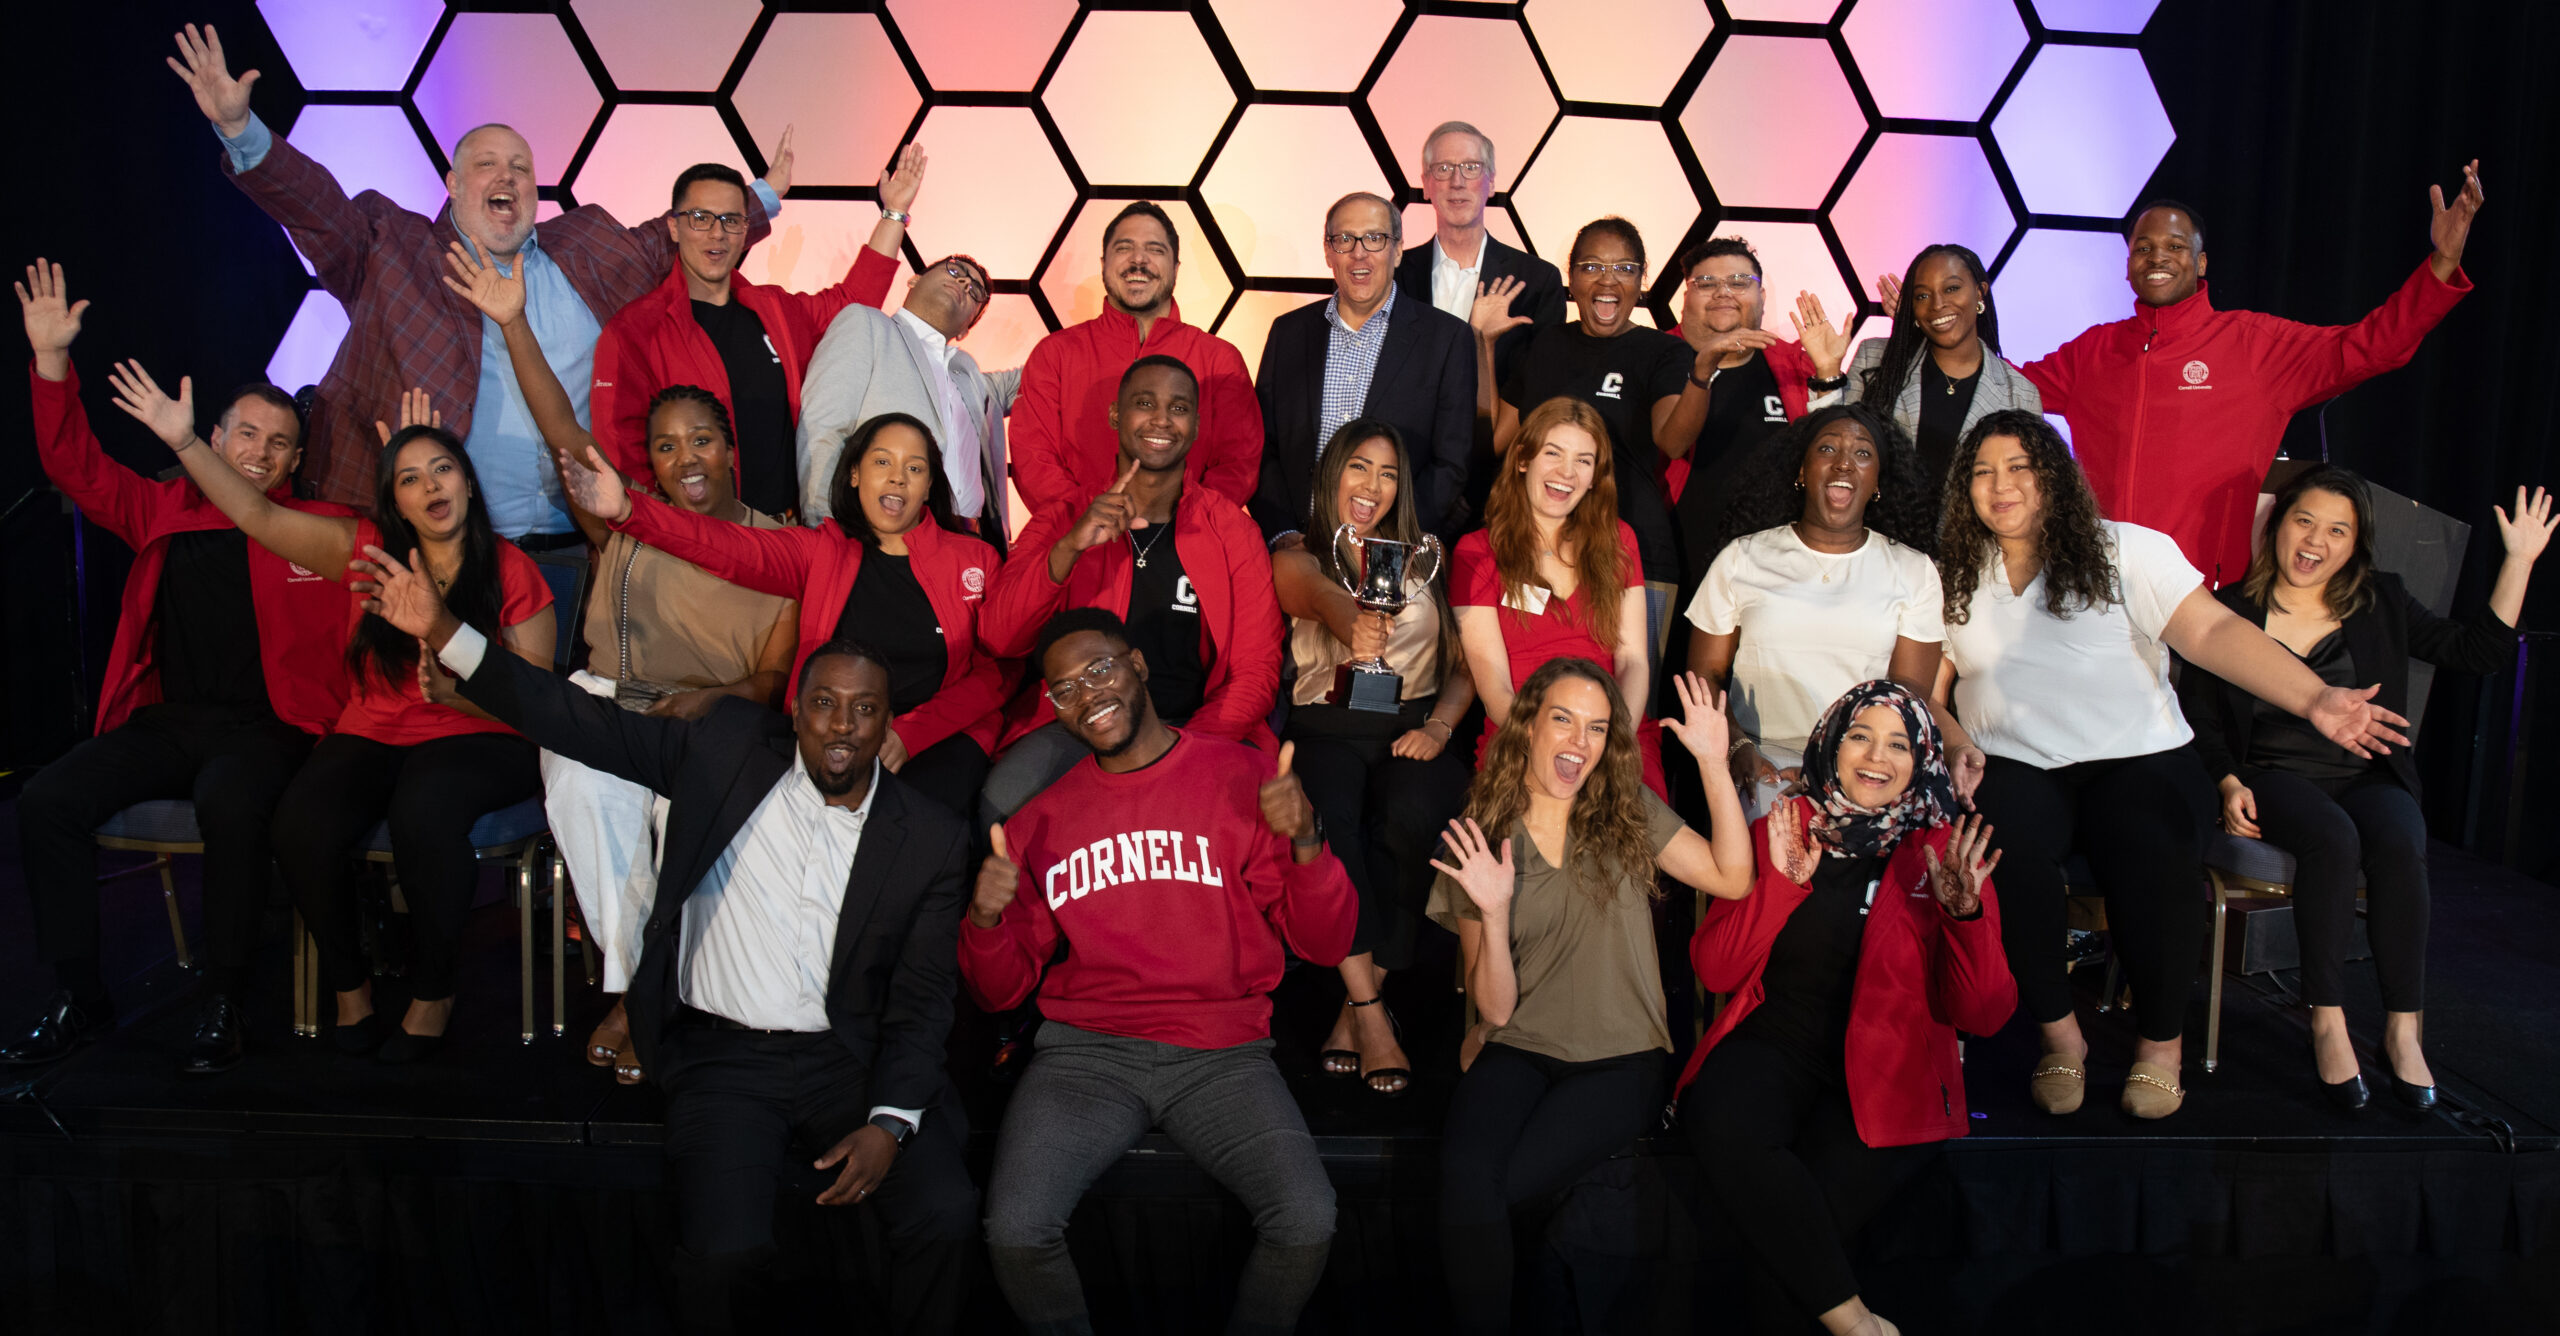 Group of Cornell MBA students posing in funny positions celebrating the winning of the T.E.A.M. trophy at Consortium Orientation Program in 2022.